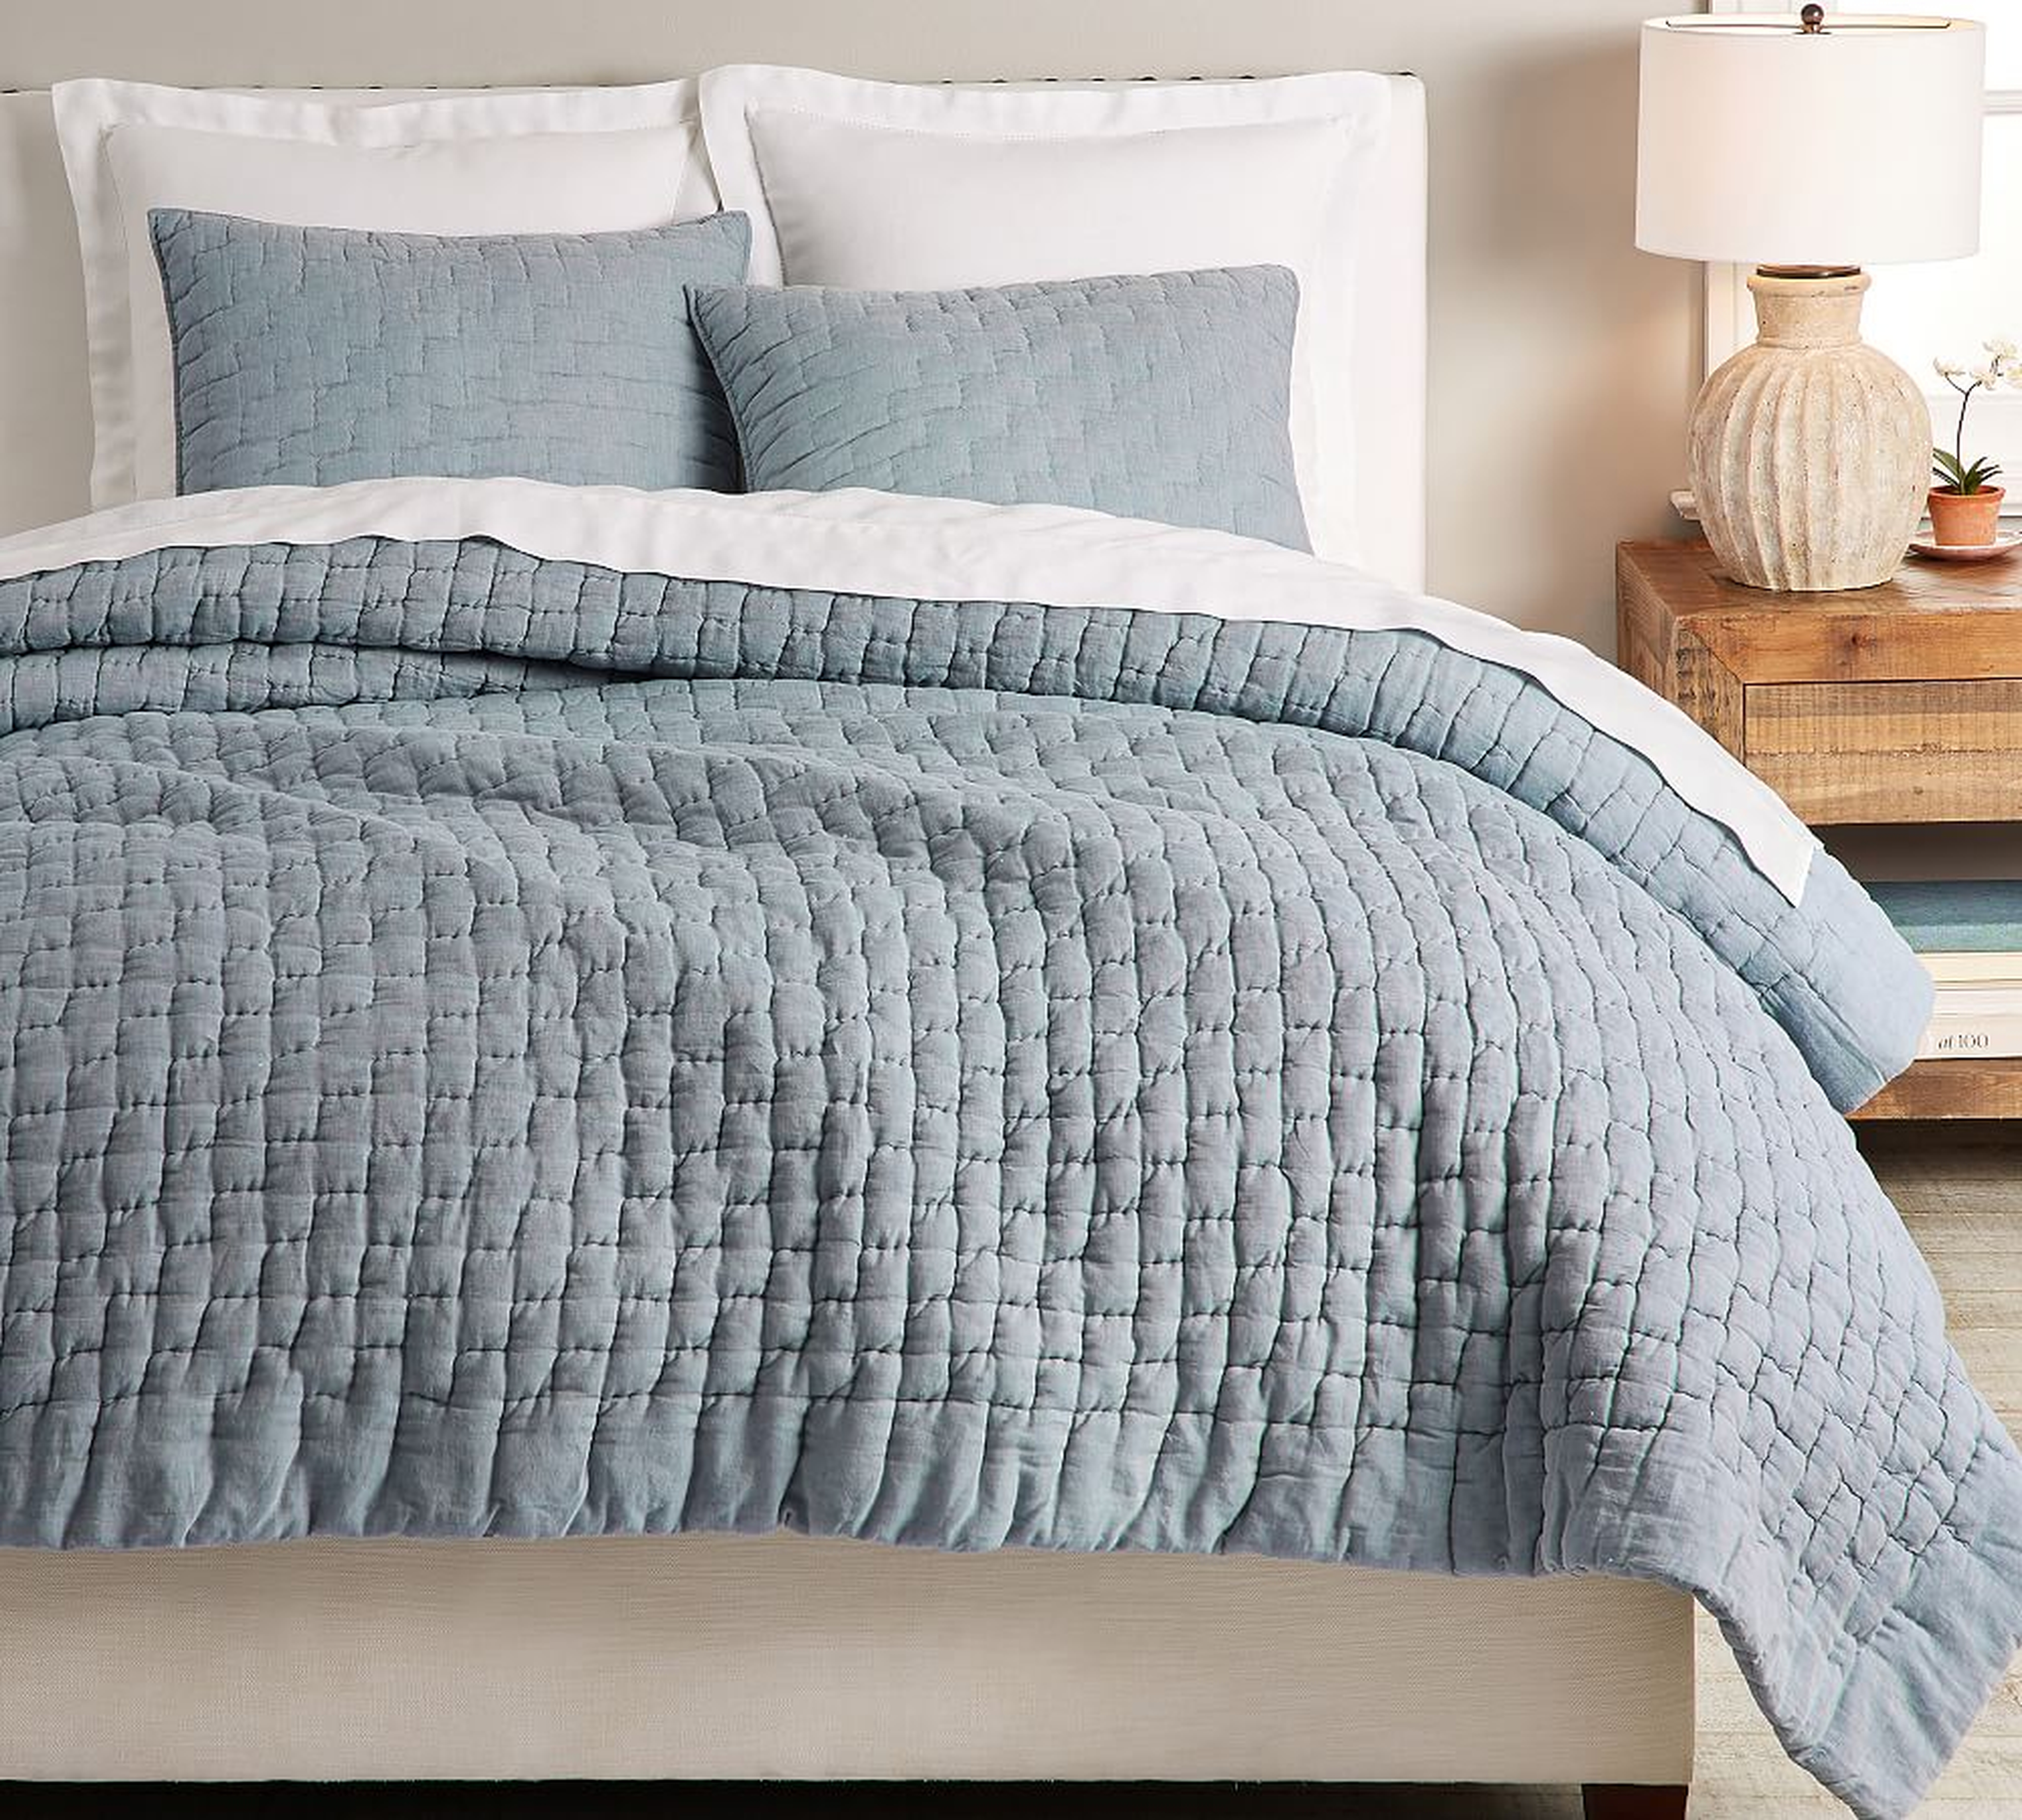 Bliss Handcrafted Cotton/Linen Quilt, King/Cal. King, Chambray - Pottery Barn